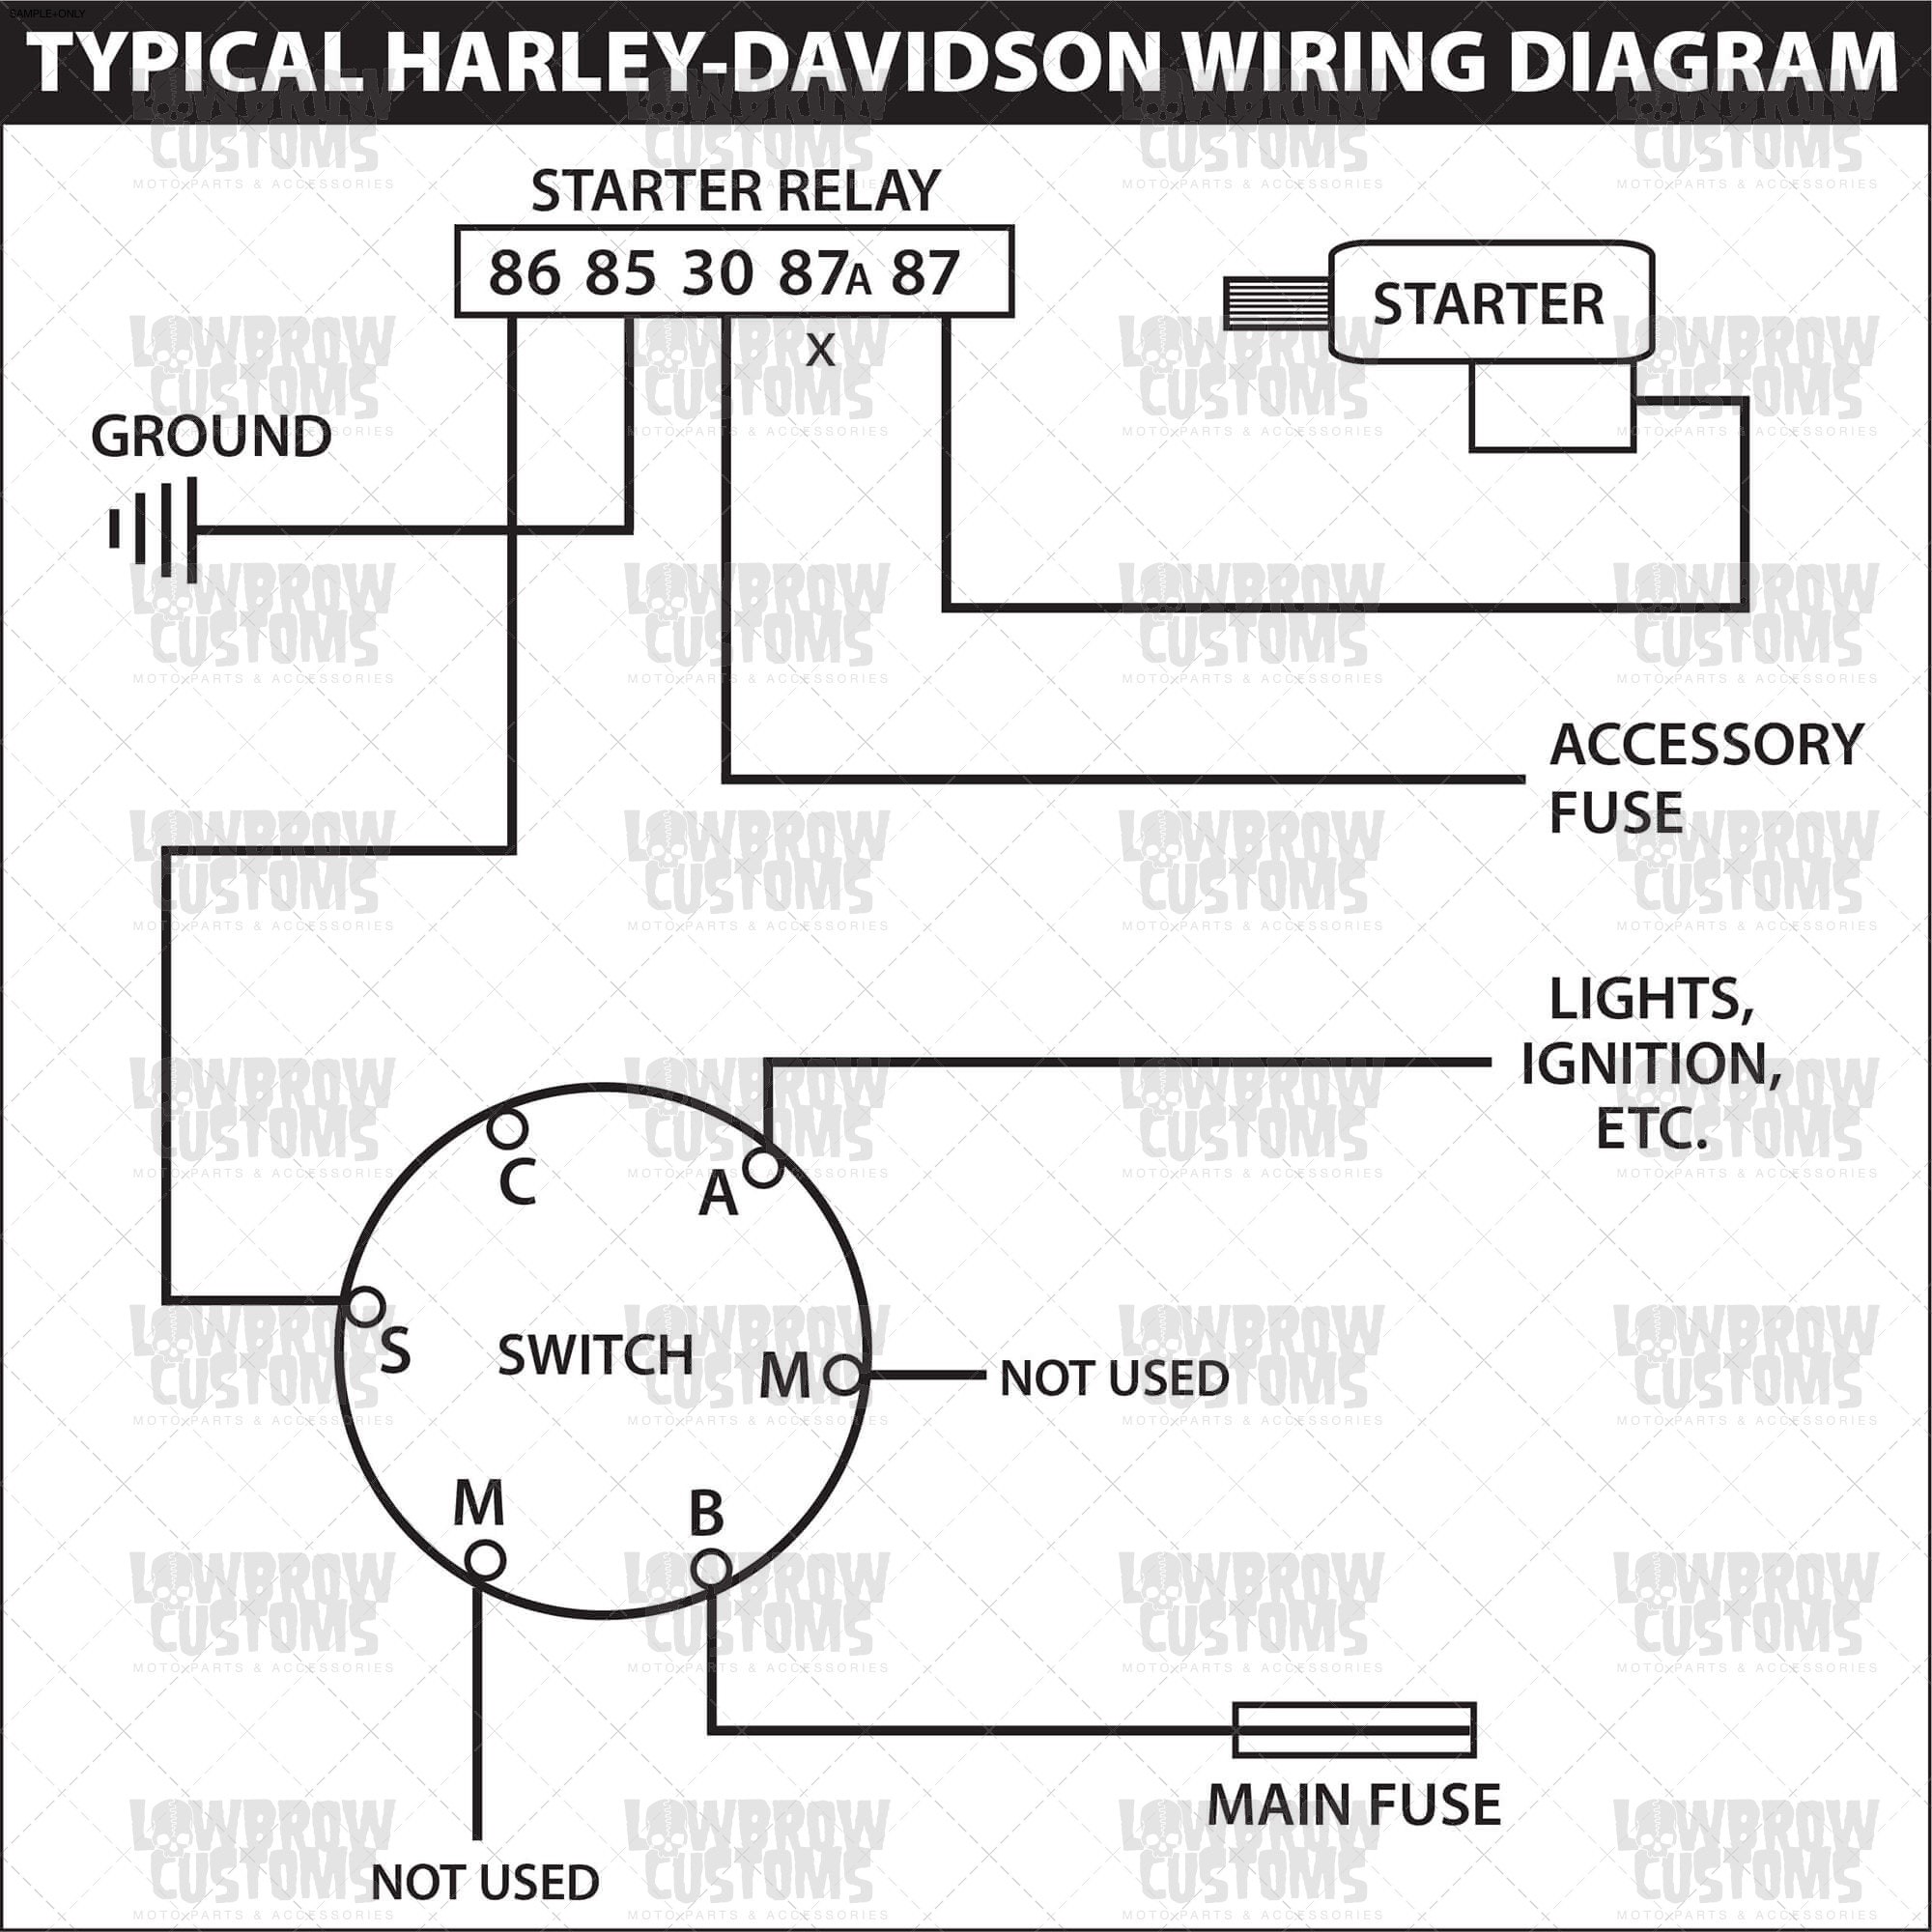 Ignition switch wiring diagram lowbrow customs weatherproof starter basic see therefore hd